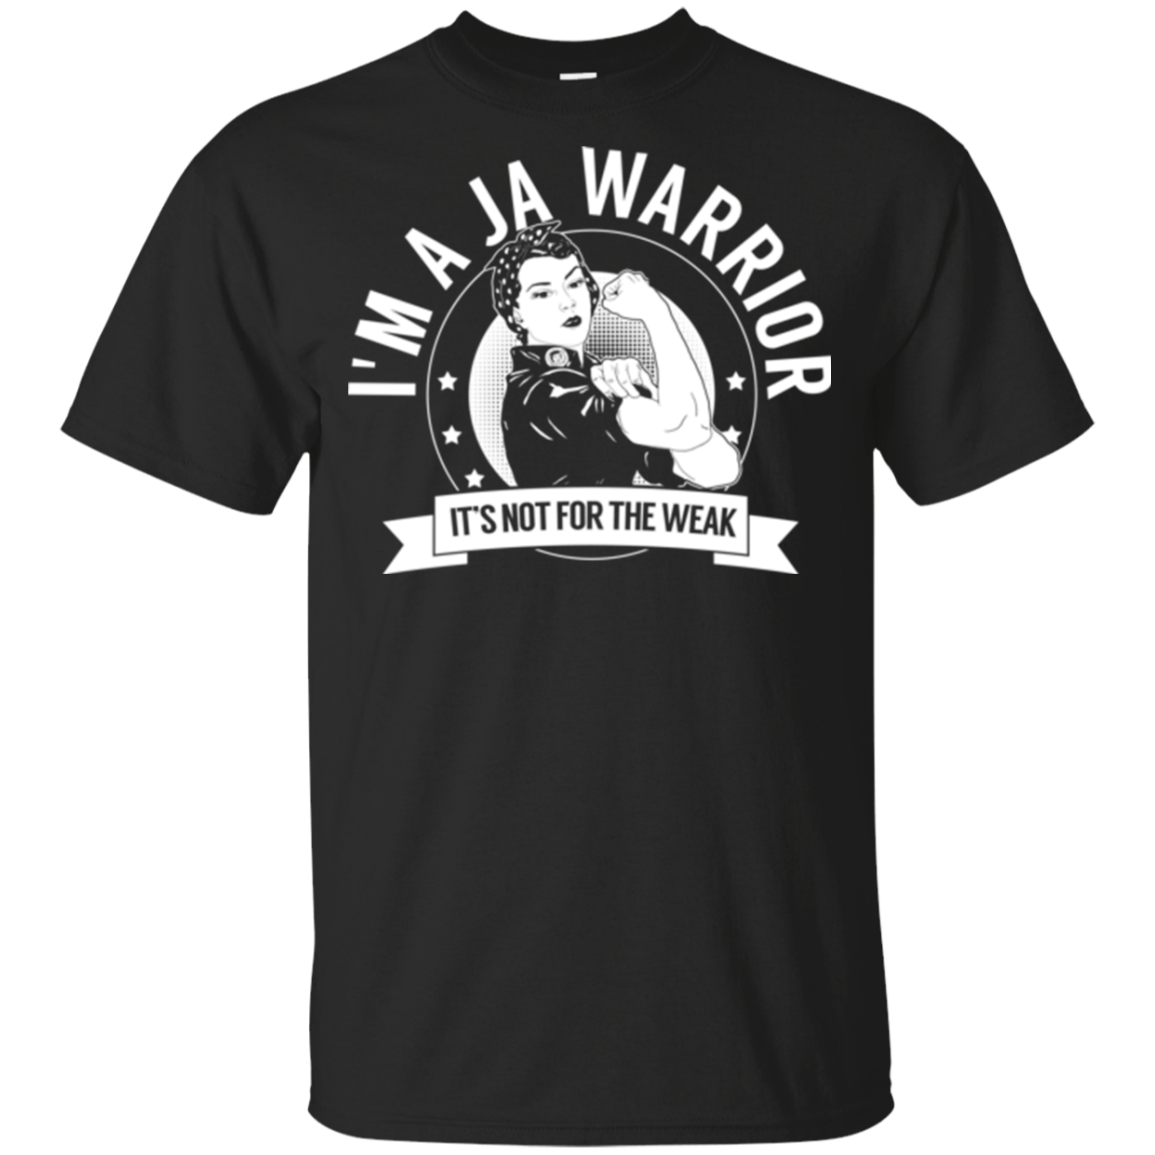 Juvenile Arthritis - JA Warrior Not For The Weak Youth Ultra Cotton T-Shirt - The Unchargeables